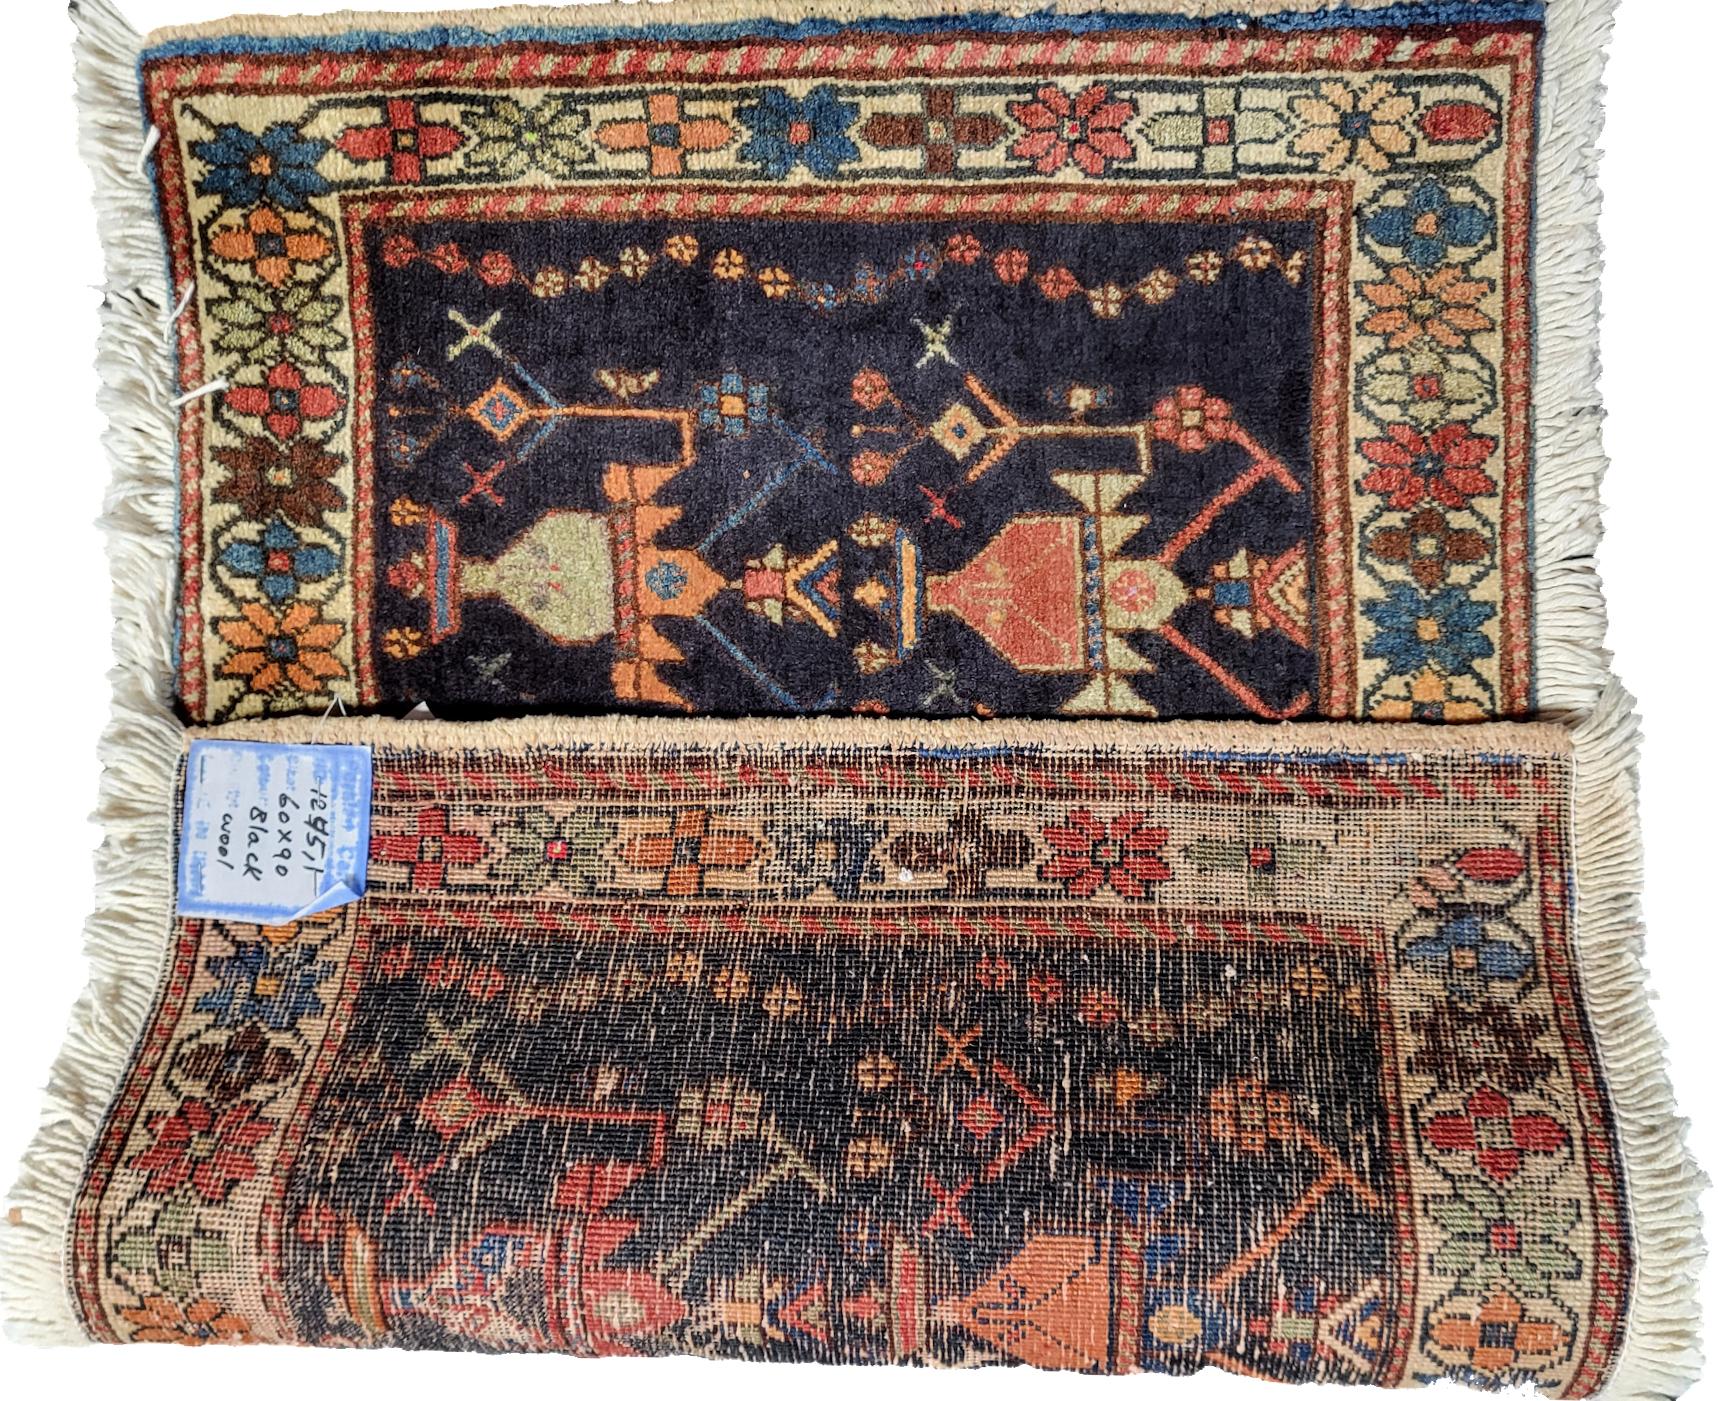 Whimsical Afshar, Tribal Persian Rug

2' x 3'

Immaculate 1940's Persian tribal rug woven by the ancient afshar tribe. This rug is in fact a panel of a cushion used for seating by the Afshar tribe that has been repurposed as a small entry rug. The